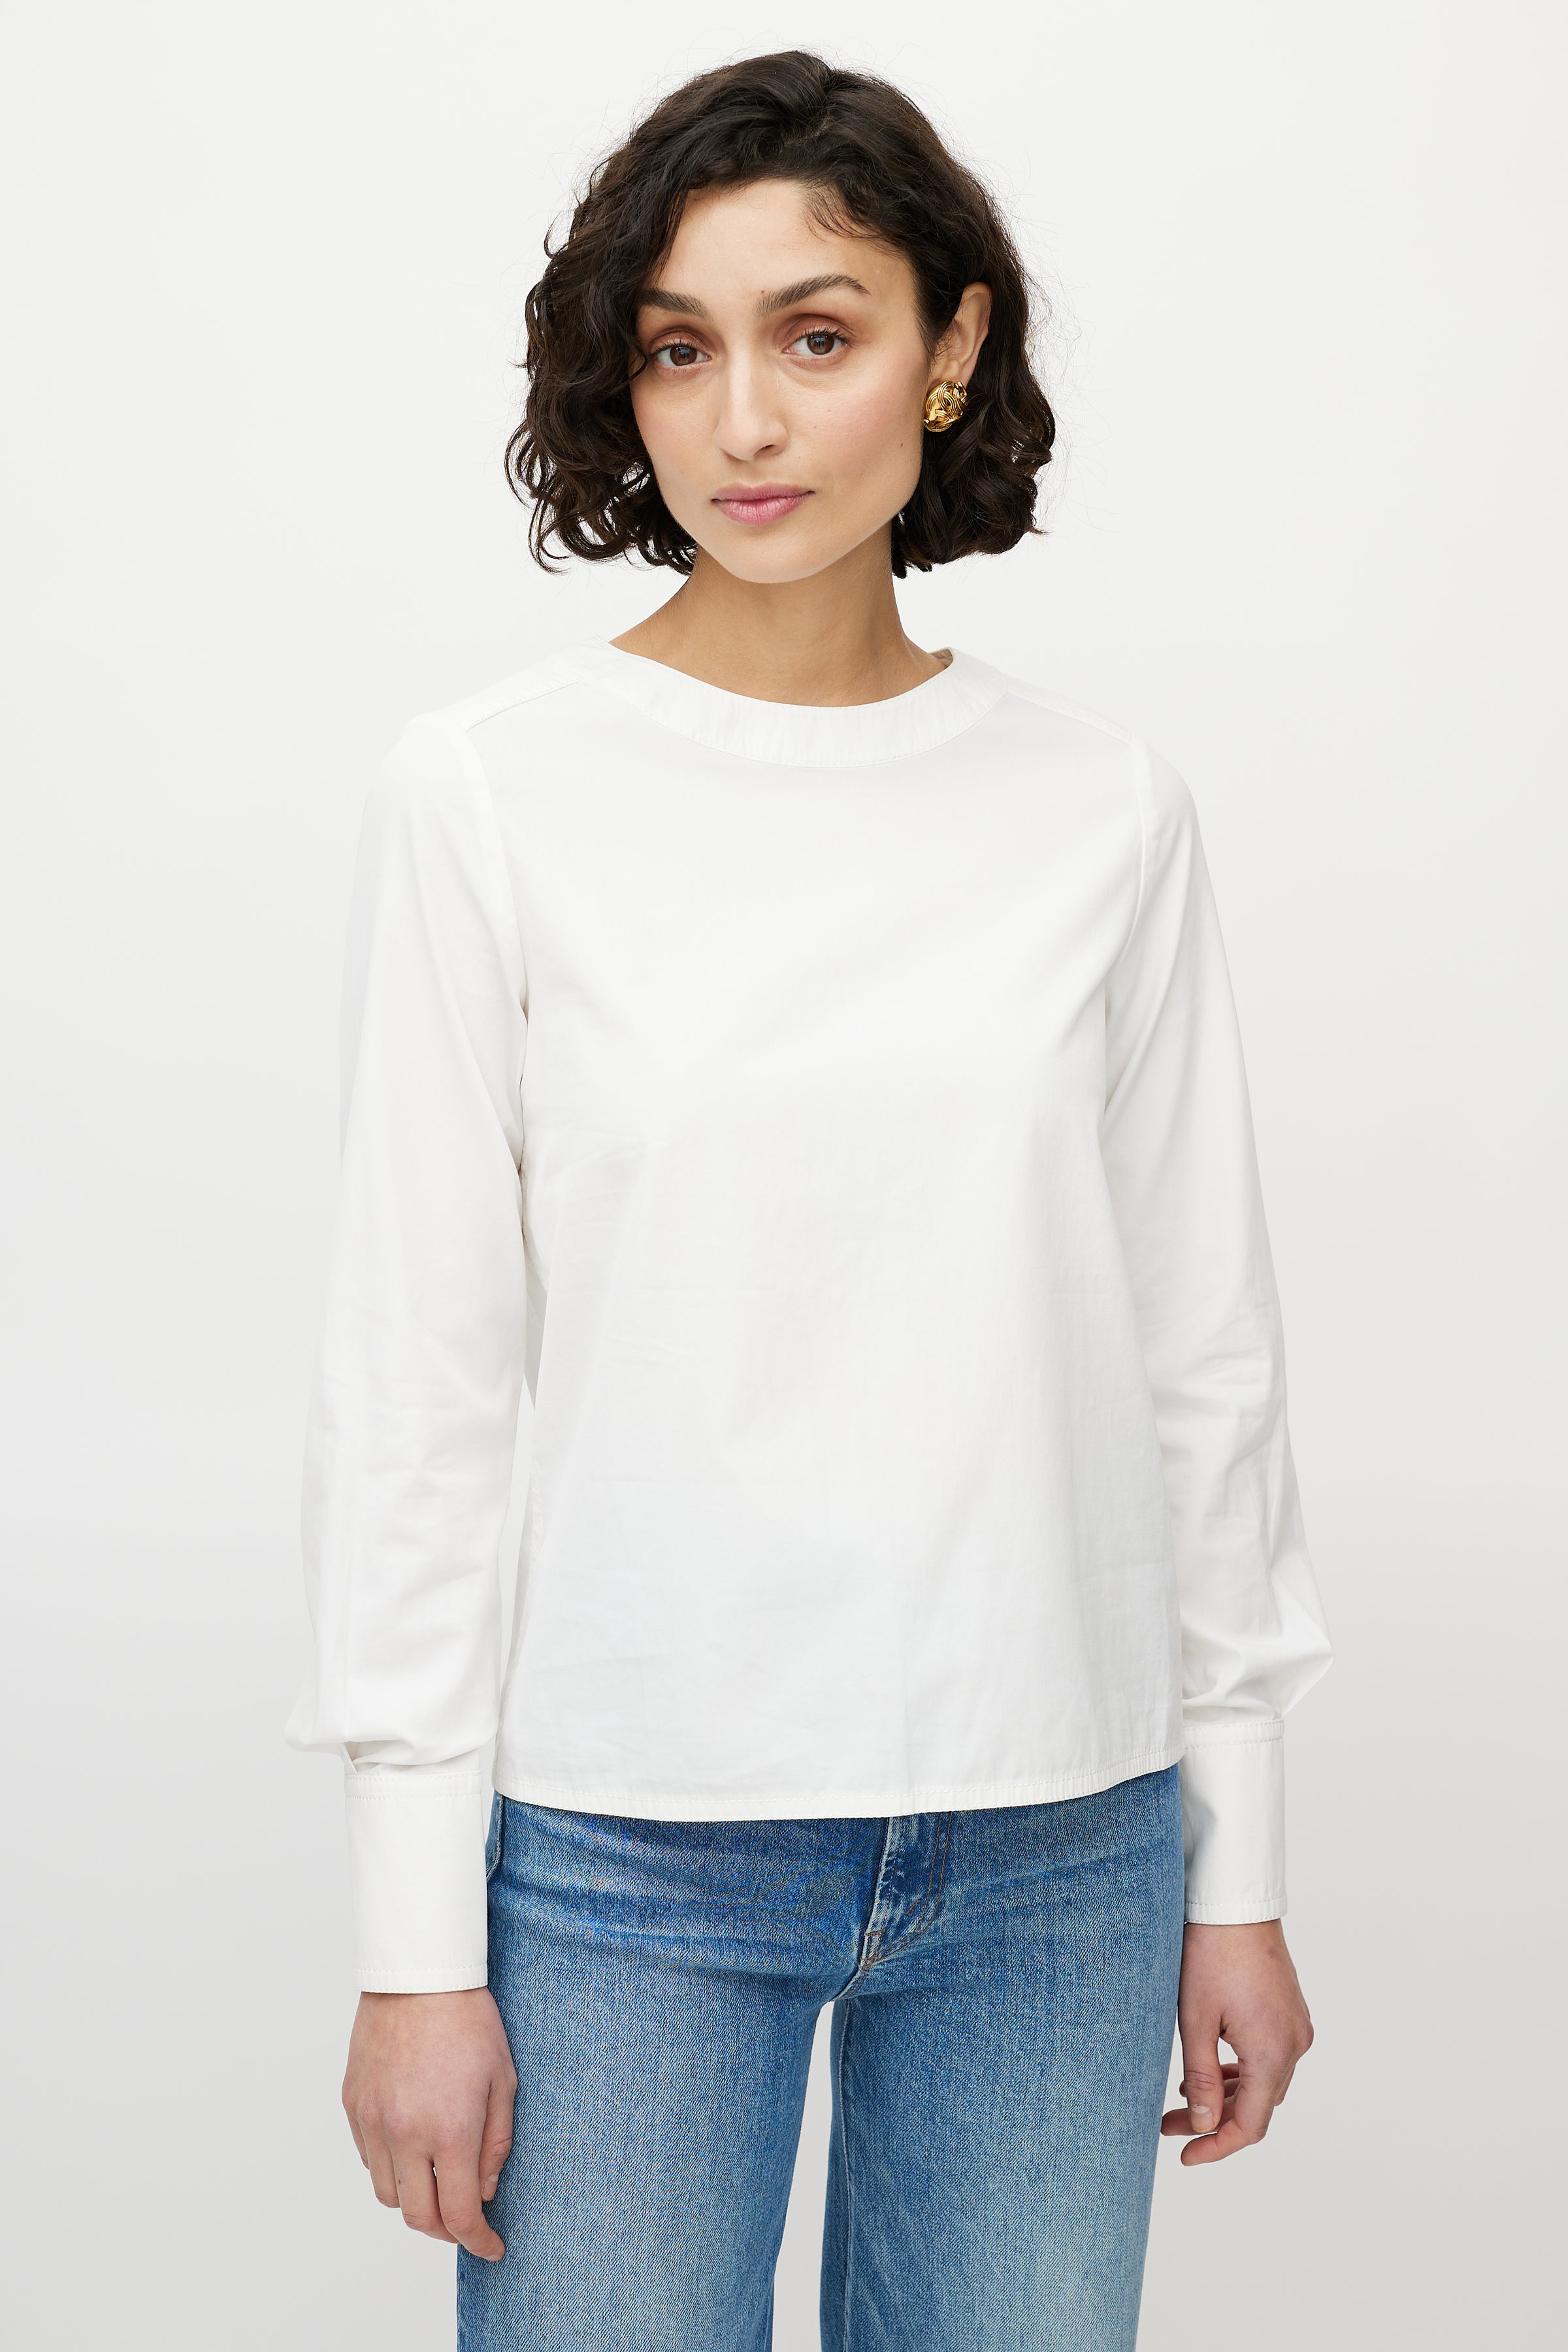 Chanel // White Buttoned Back Blouse – VSP Consignment